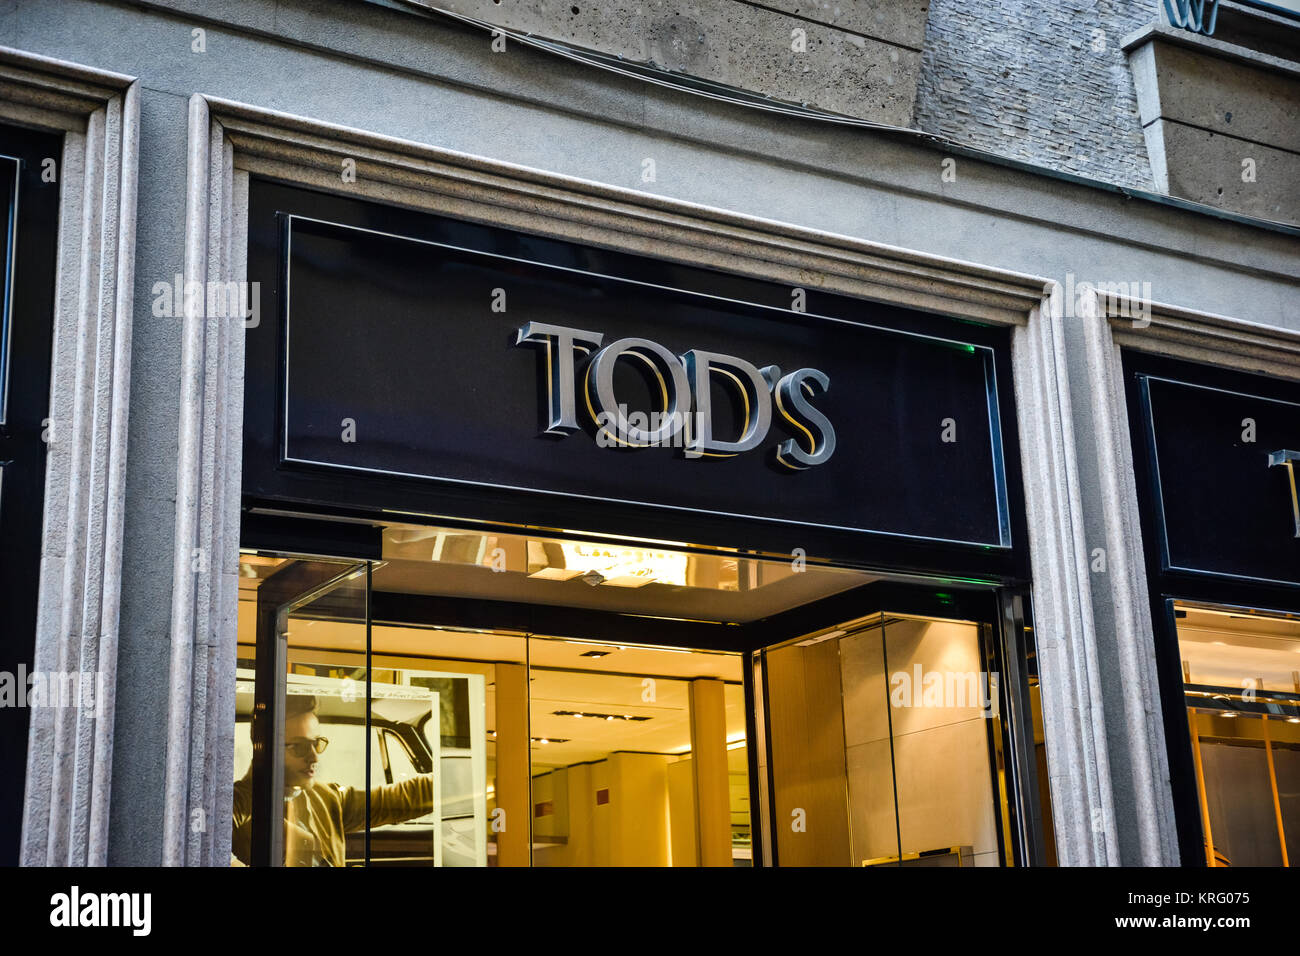 Tods Logo High Resolution Stock Photography and Images - Alamy